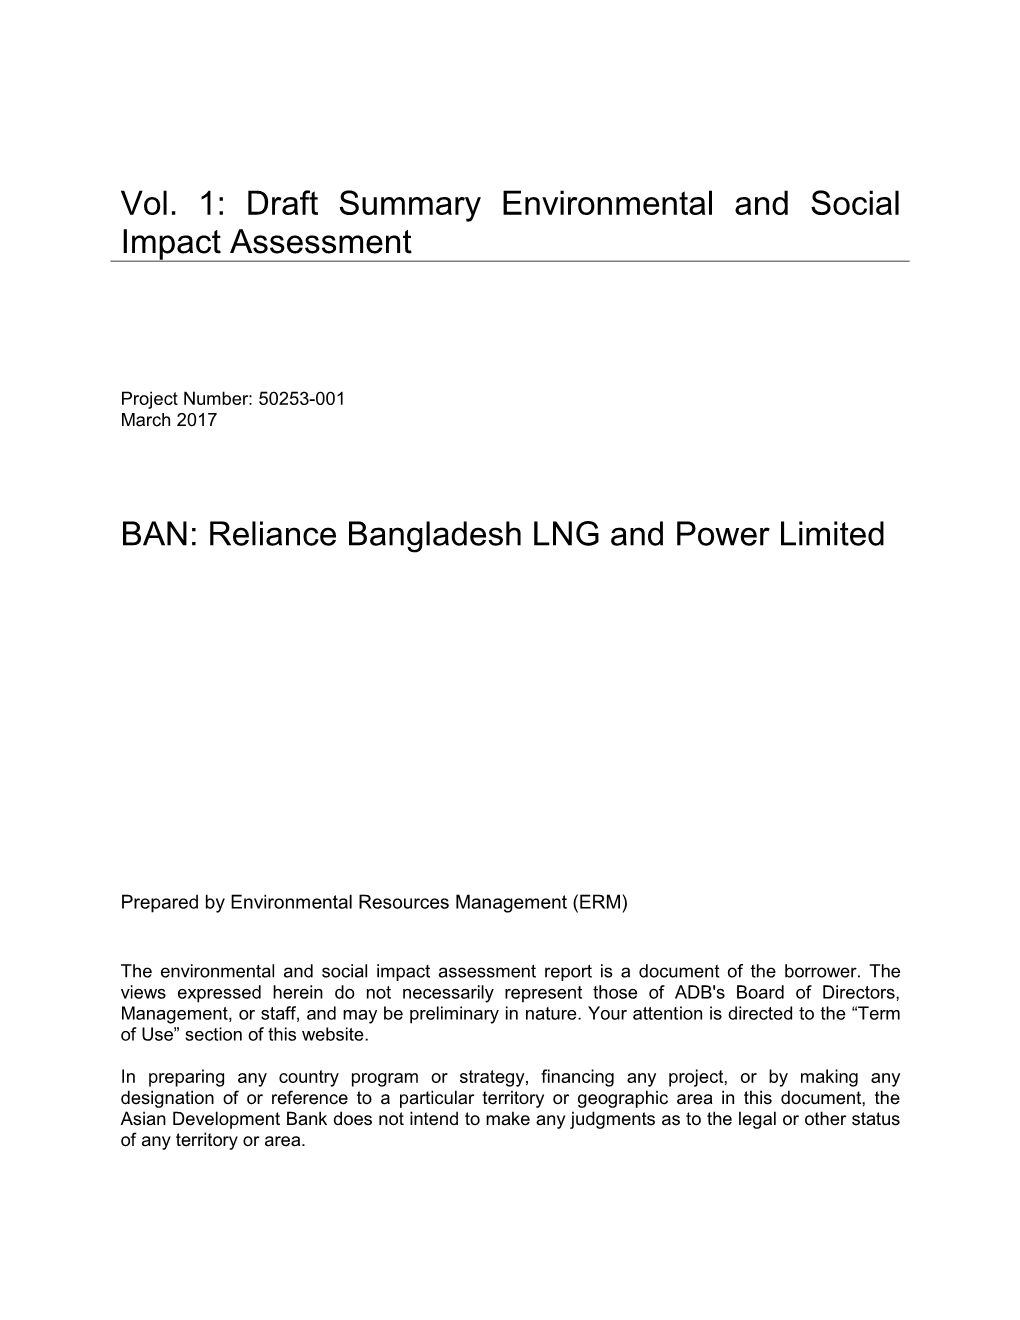 Reliance Bangladesh LNG and Power Limited